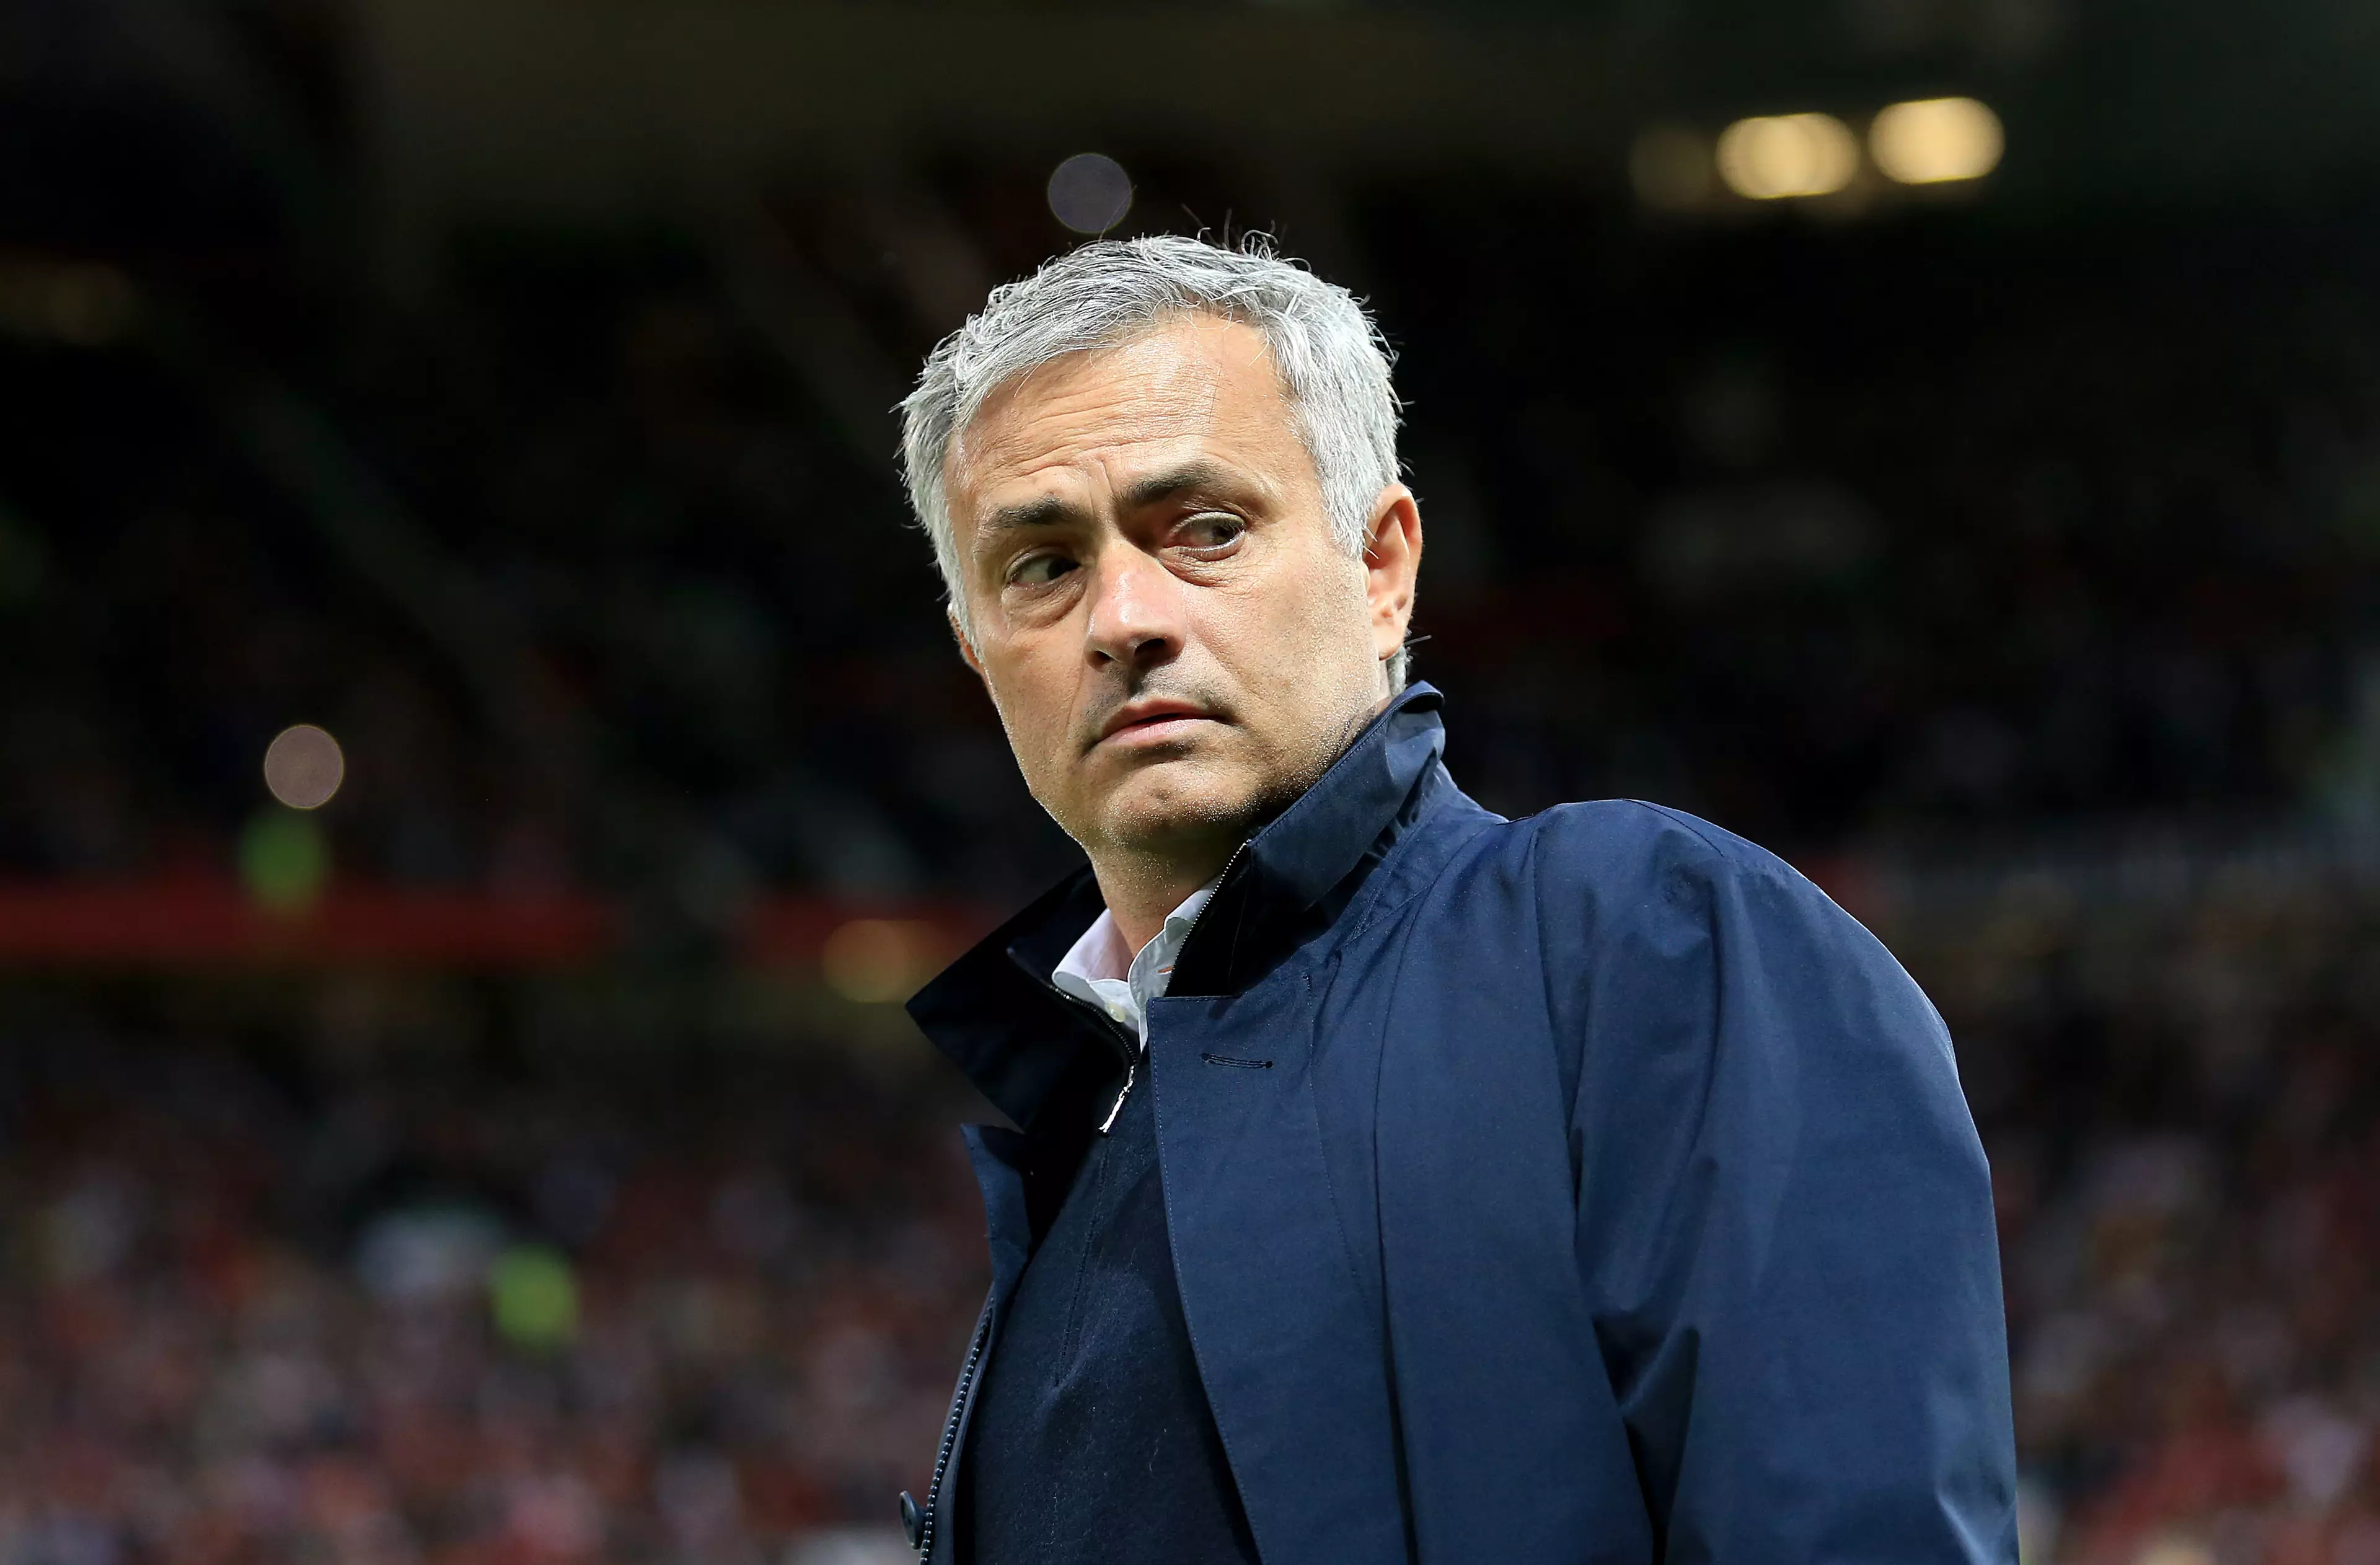 Jose Mourinho To Drop Two Stars For Chelsea Clash